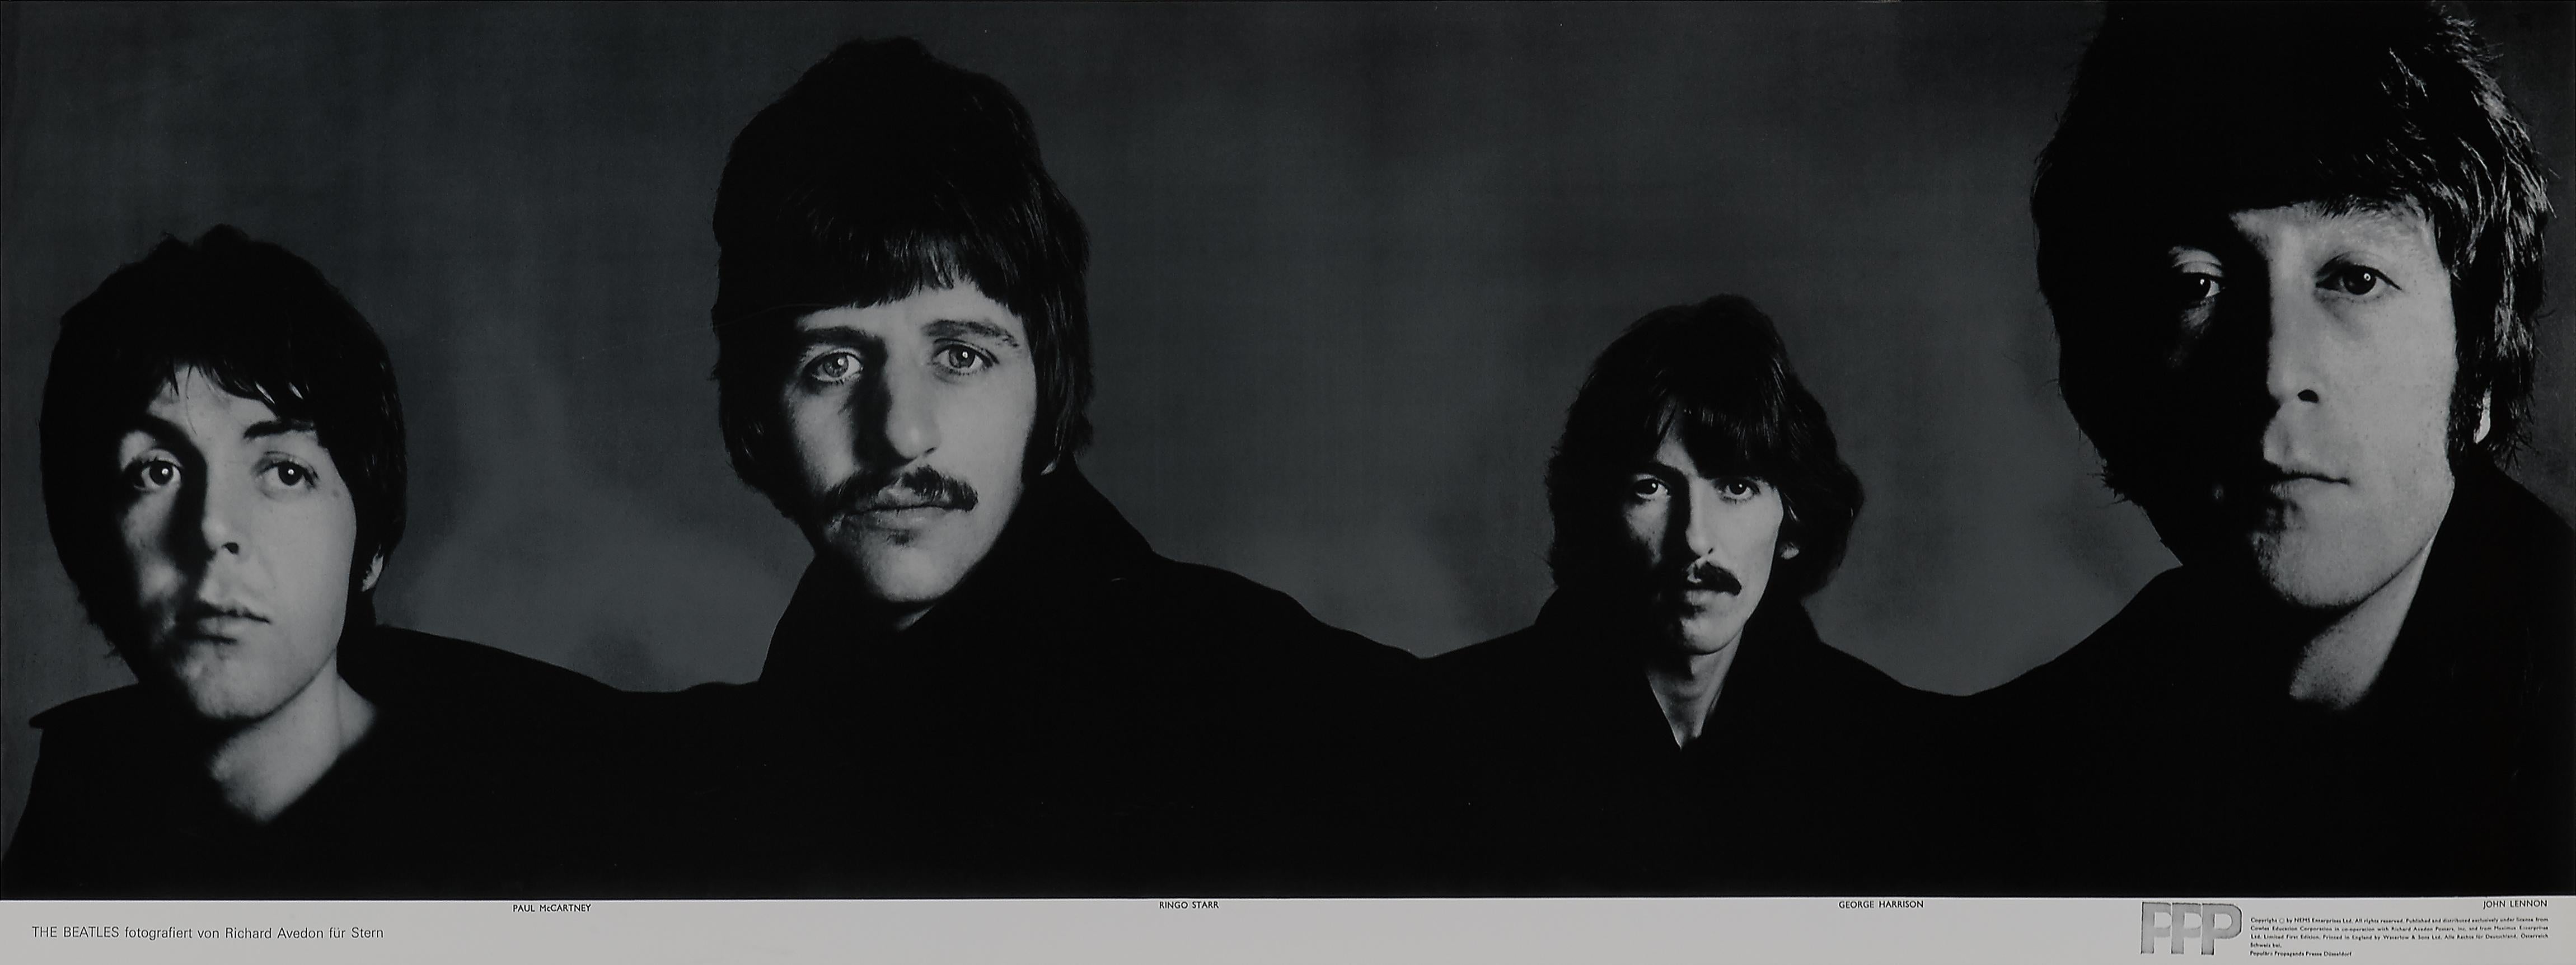 'The Beatles' Complete Set of Five Promotional Posters by Richard Avedon, 1967 For Sale 6